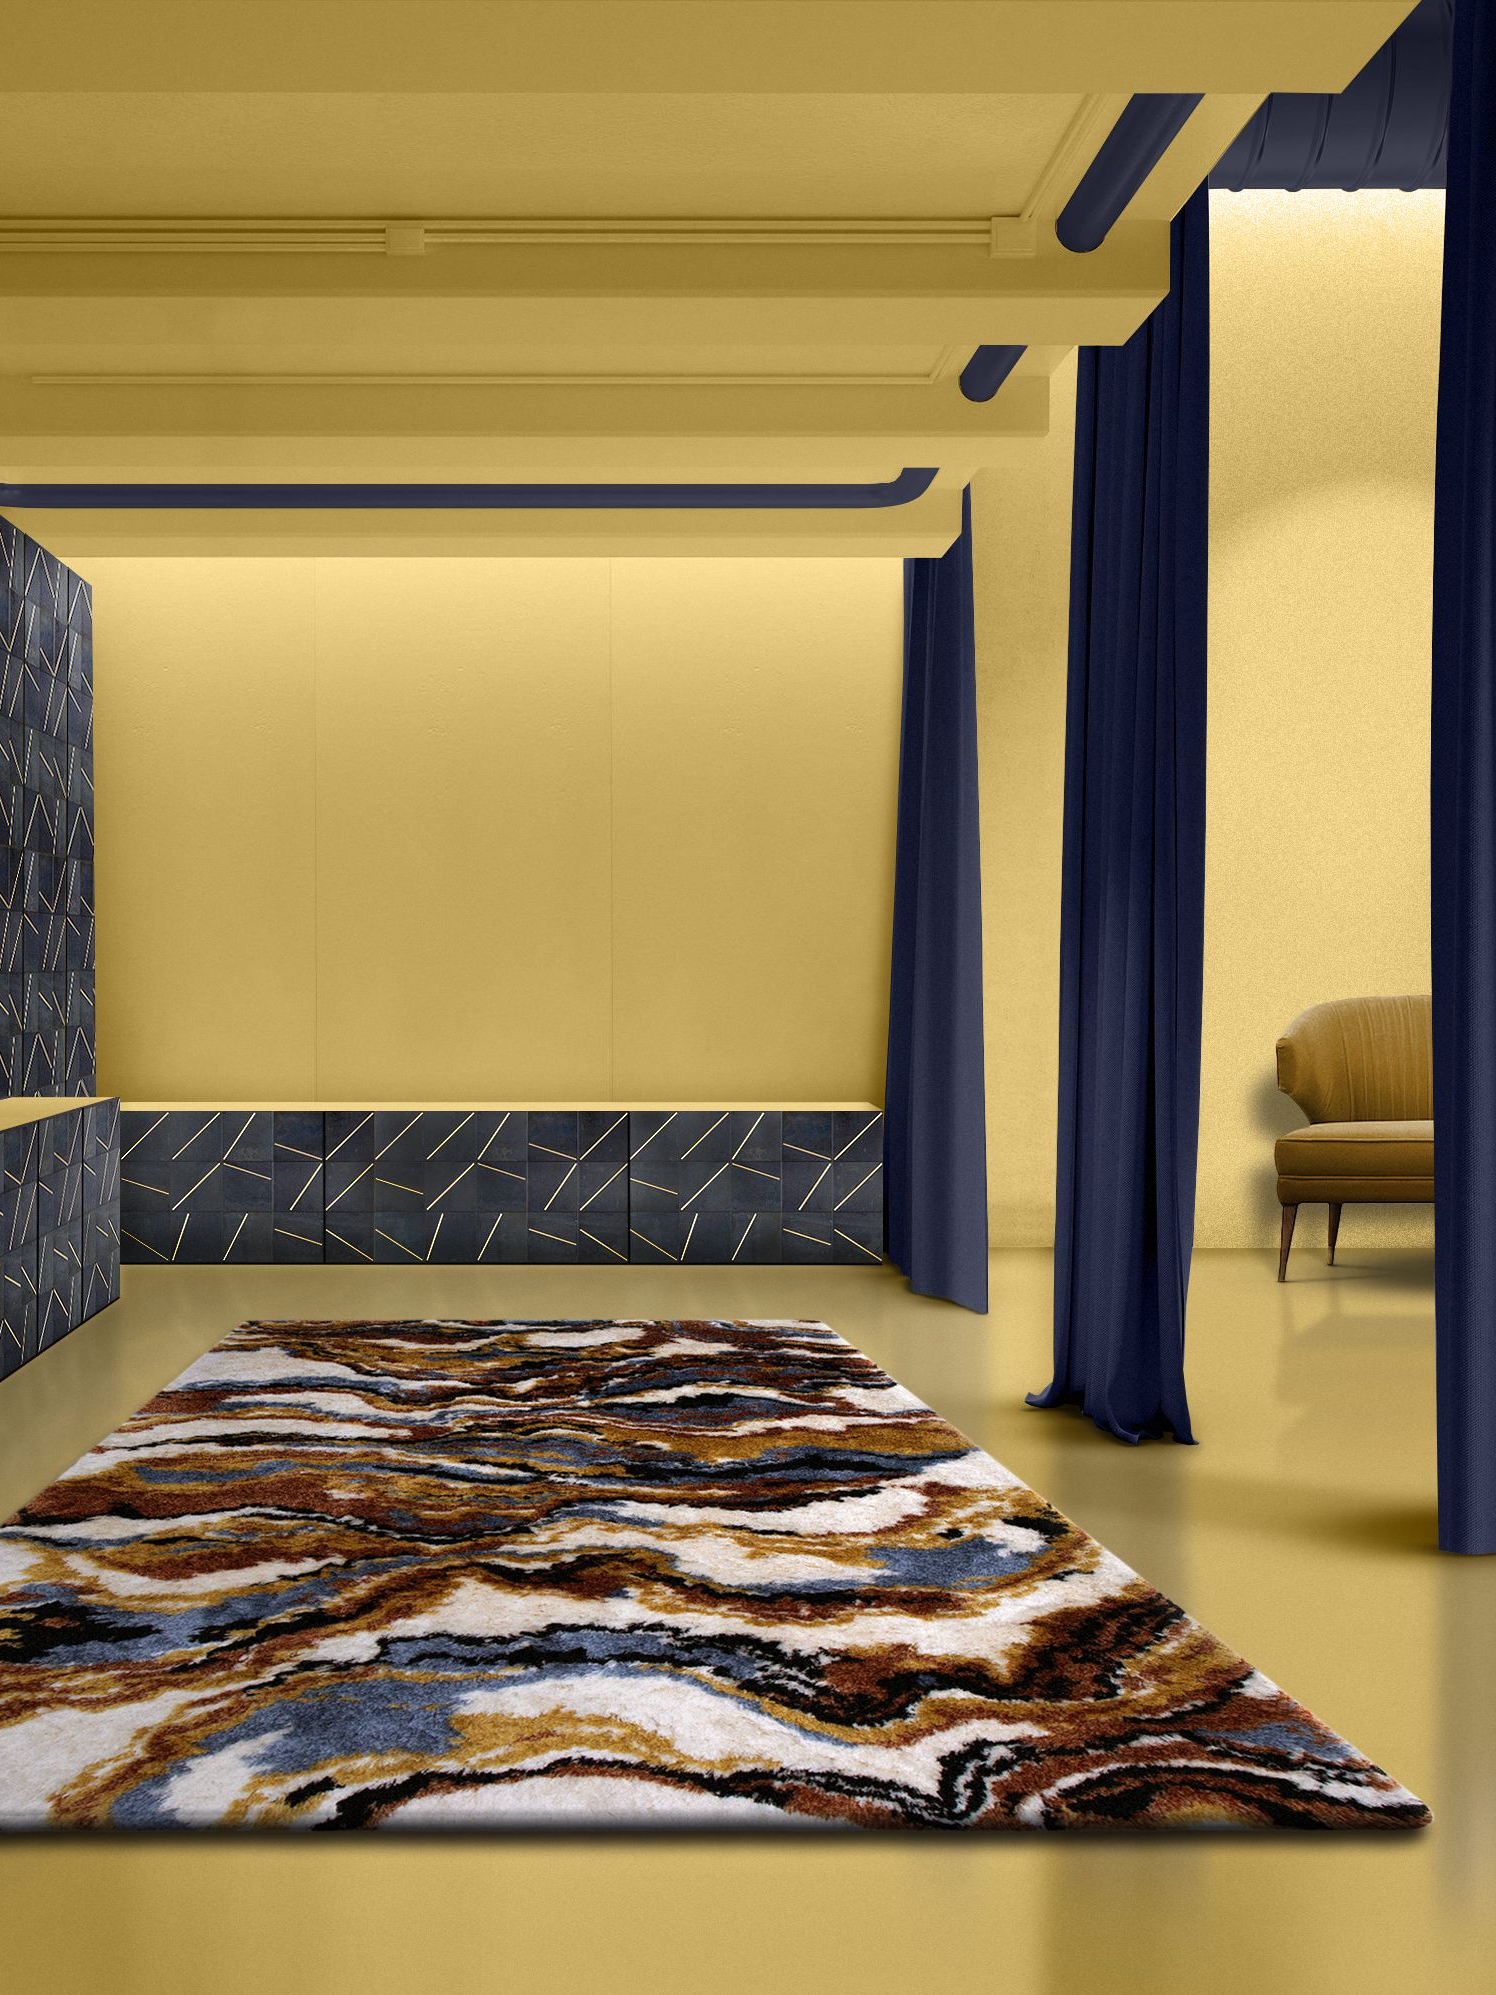 Marvellous Art Gallery with the La Land Rug by Rug'Society